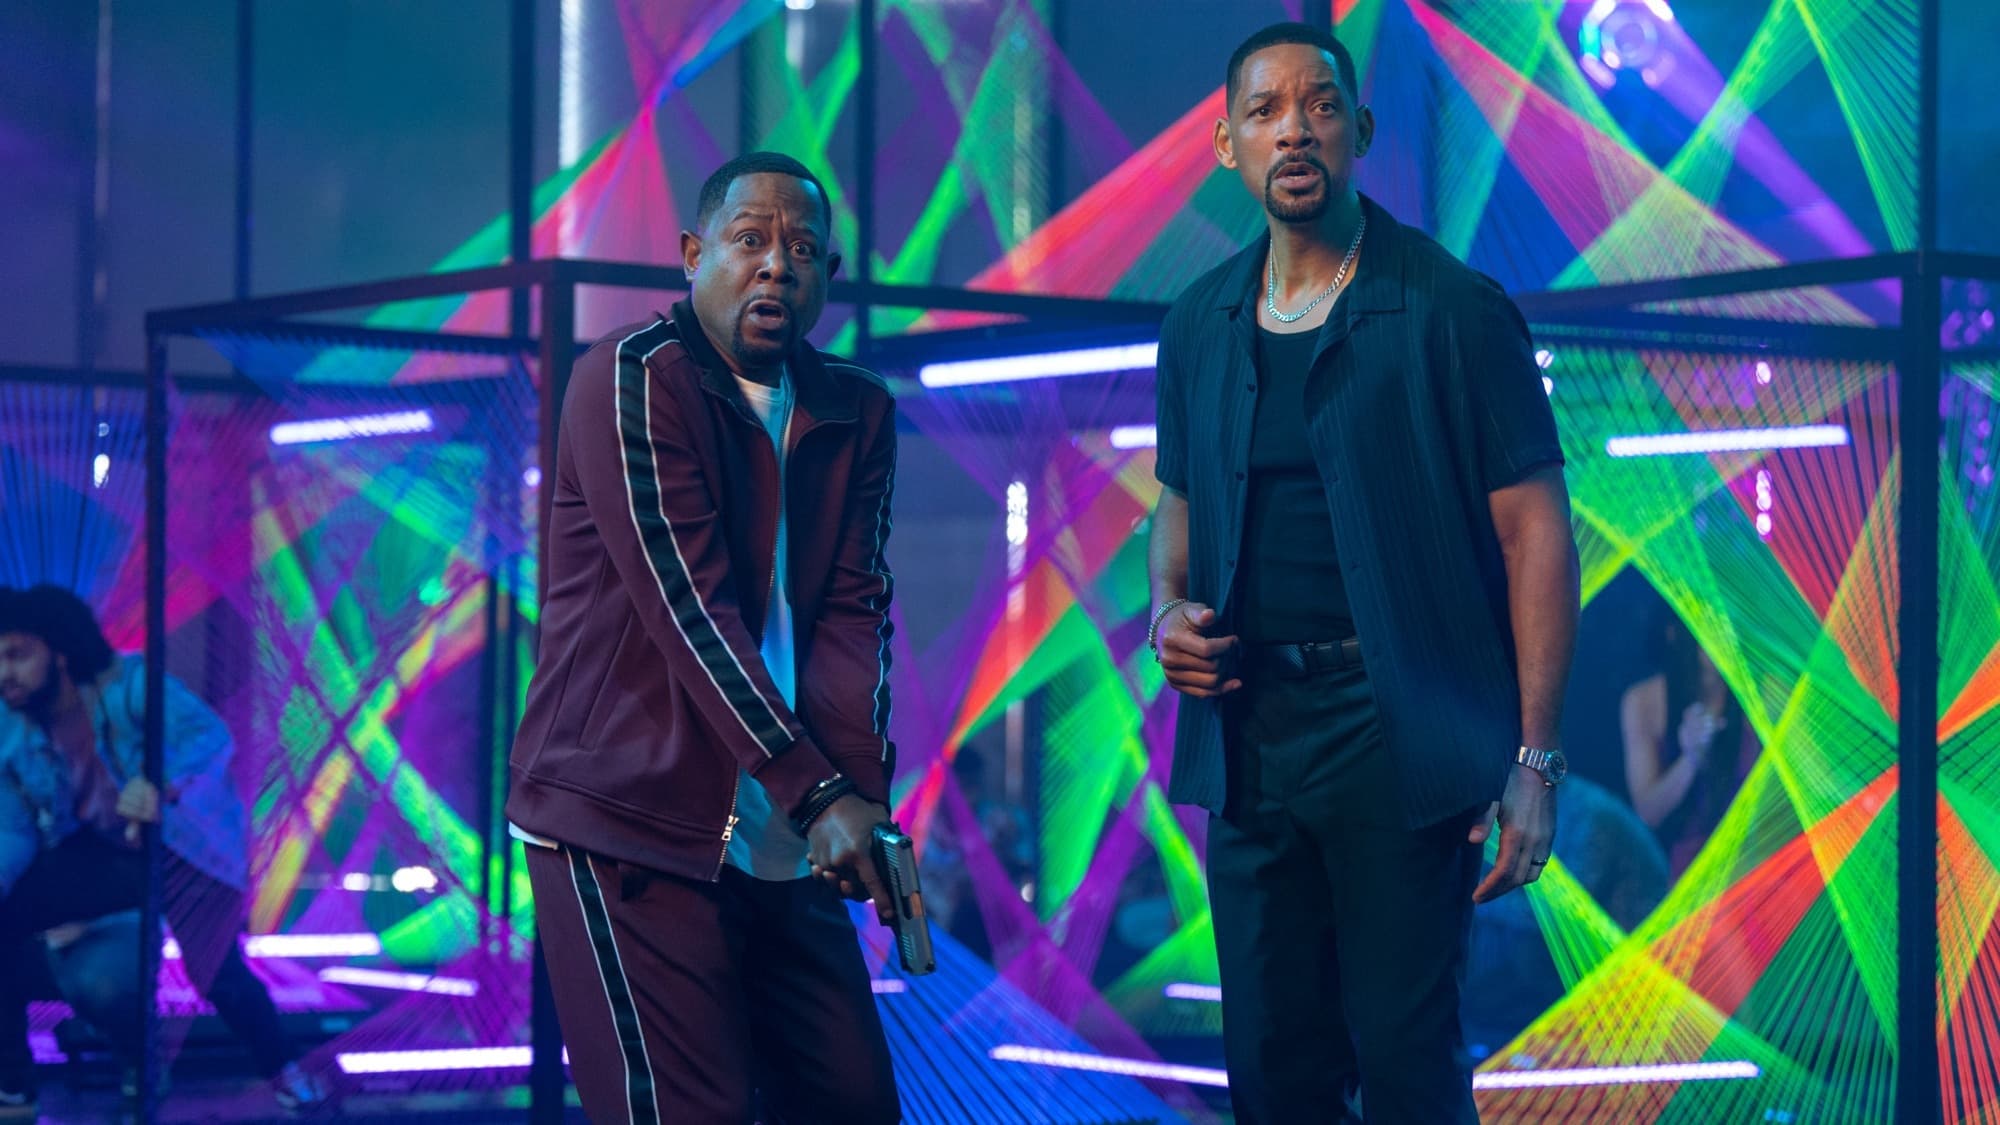 Will Smith and Martin Lawrence return for another Bad Boys sequel starting Friday, June 7